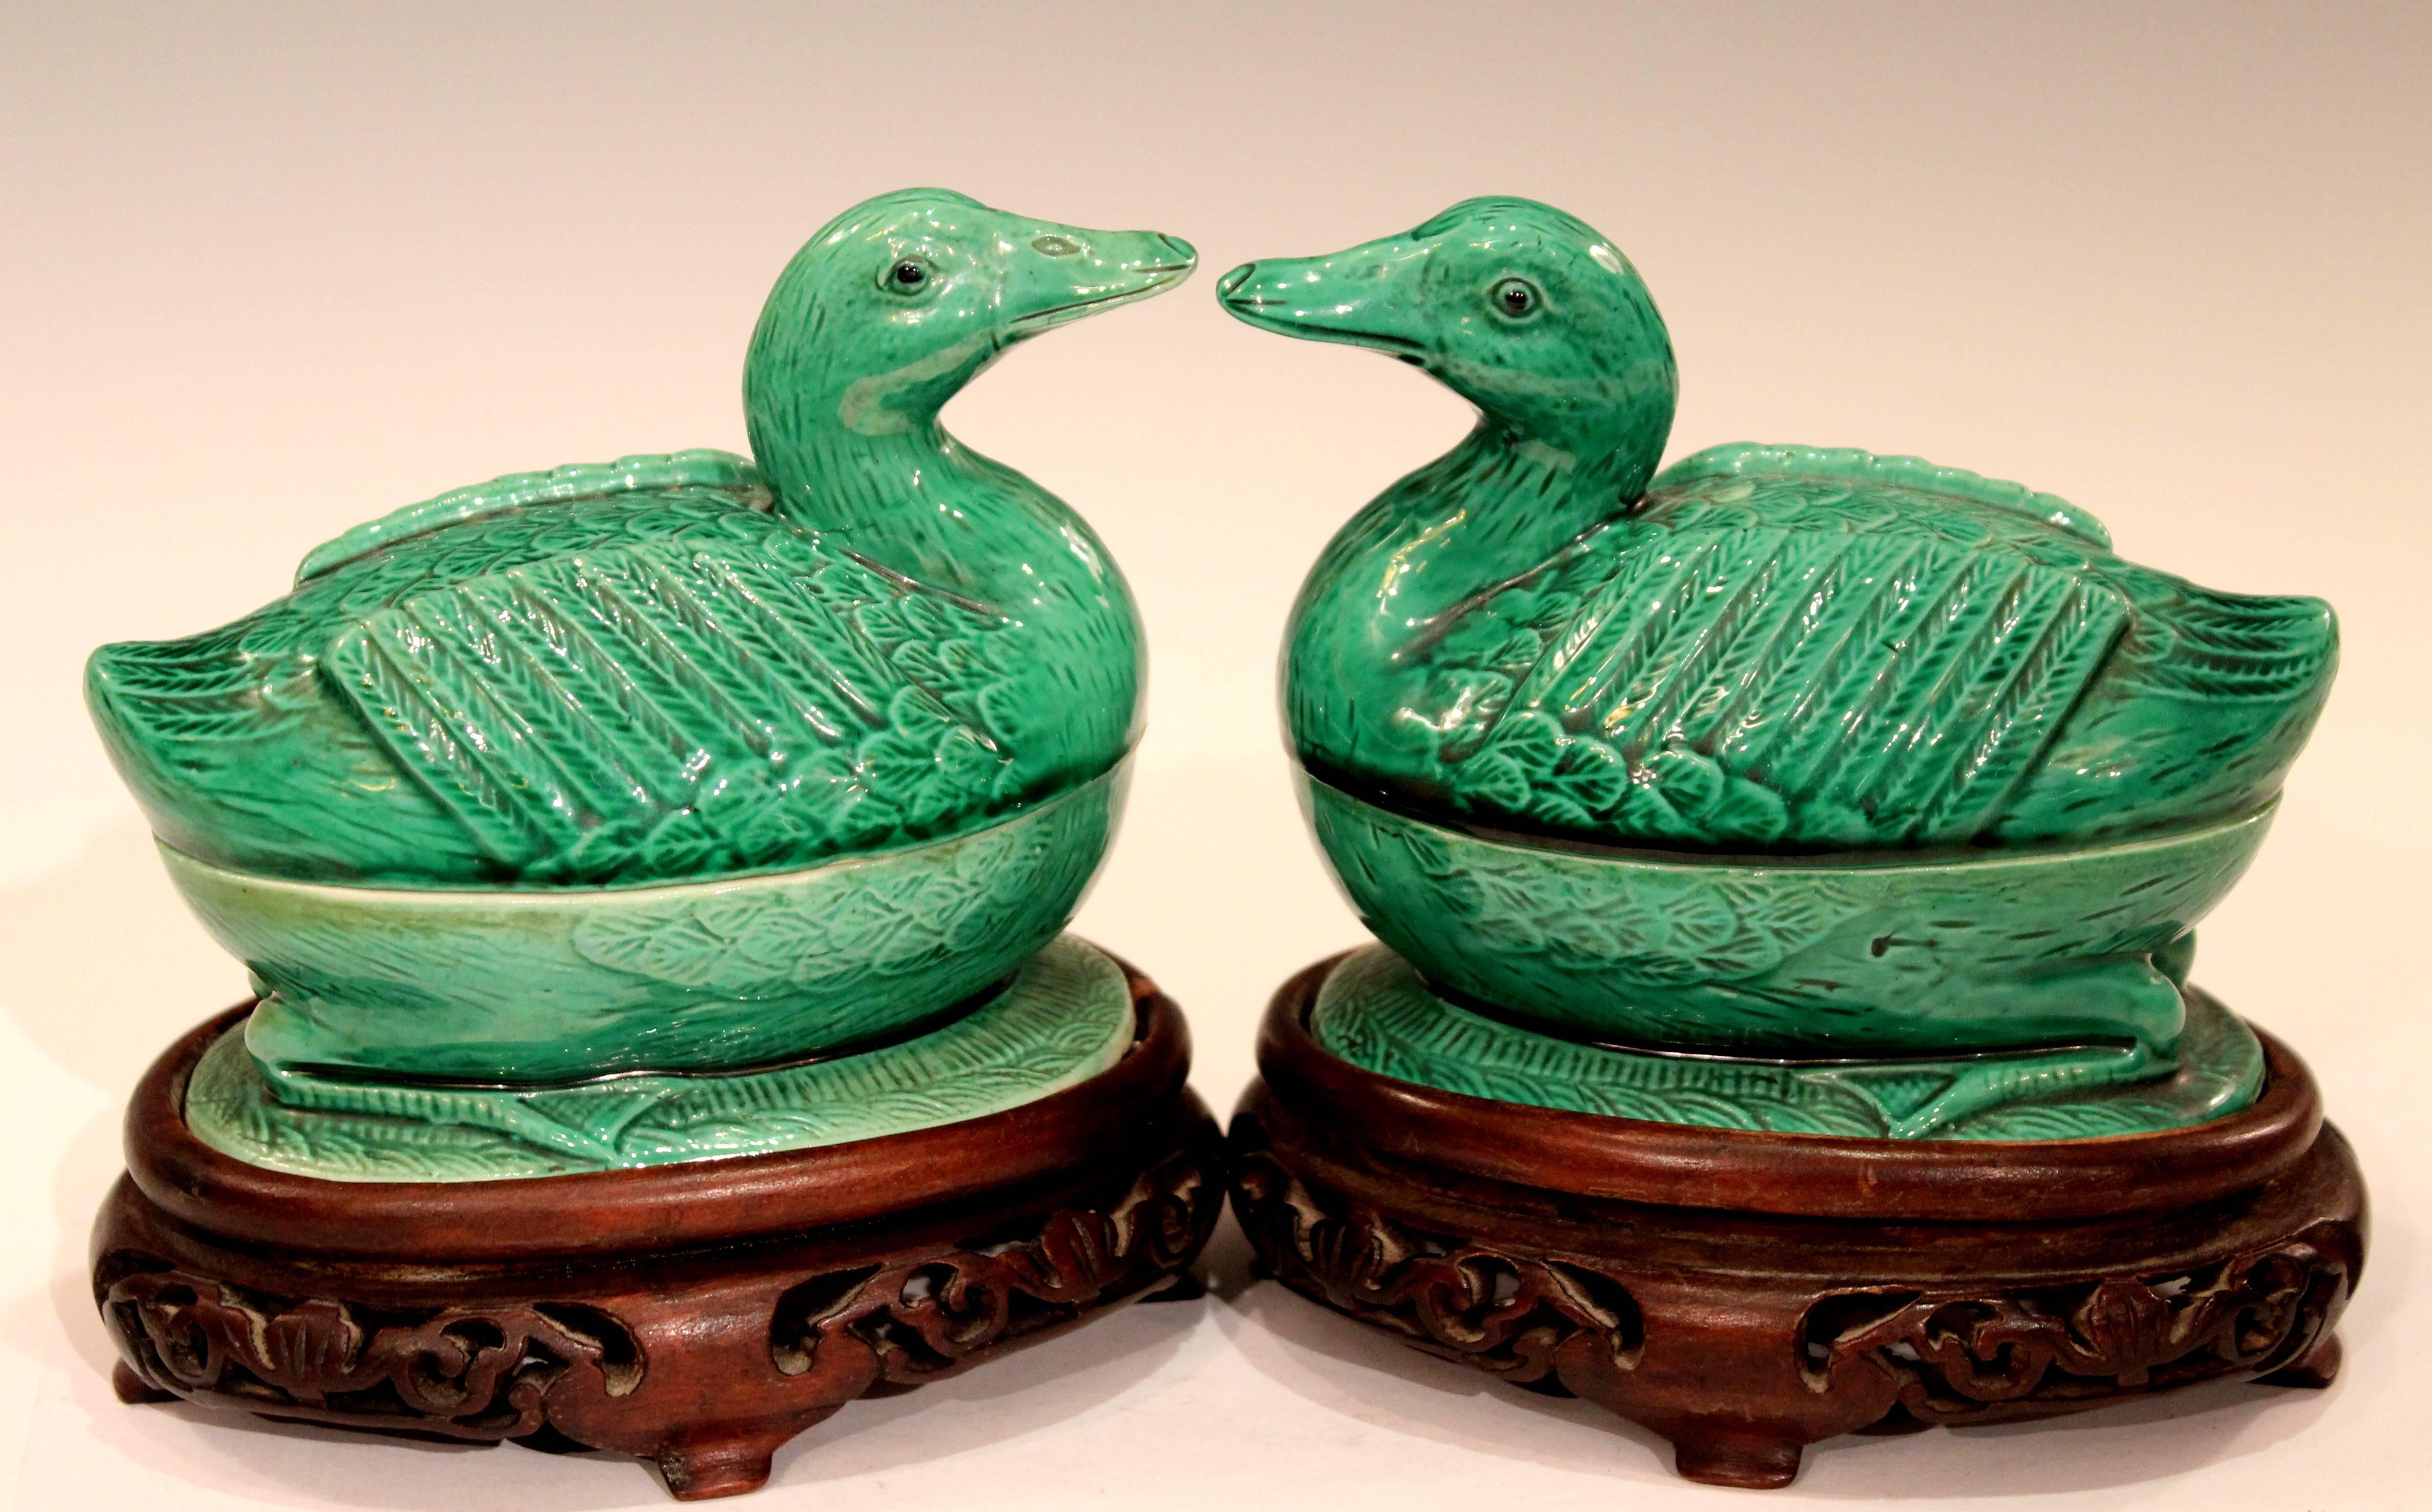 Pair of Chinese Porcelain Bird Figure Covered Boxes Ducks Geese Marked 5